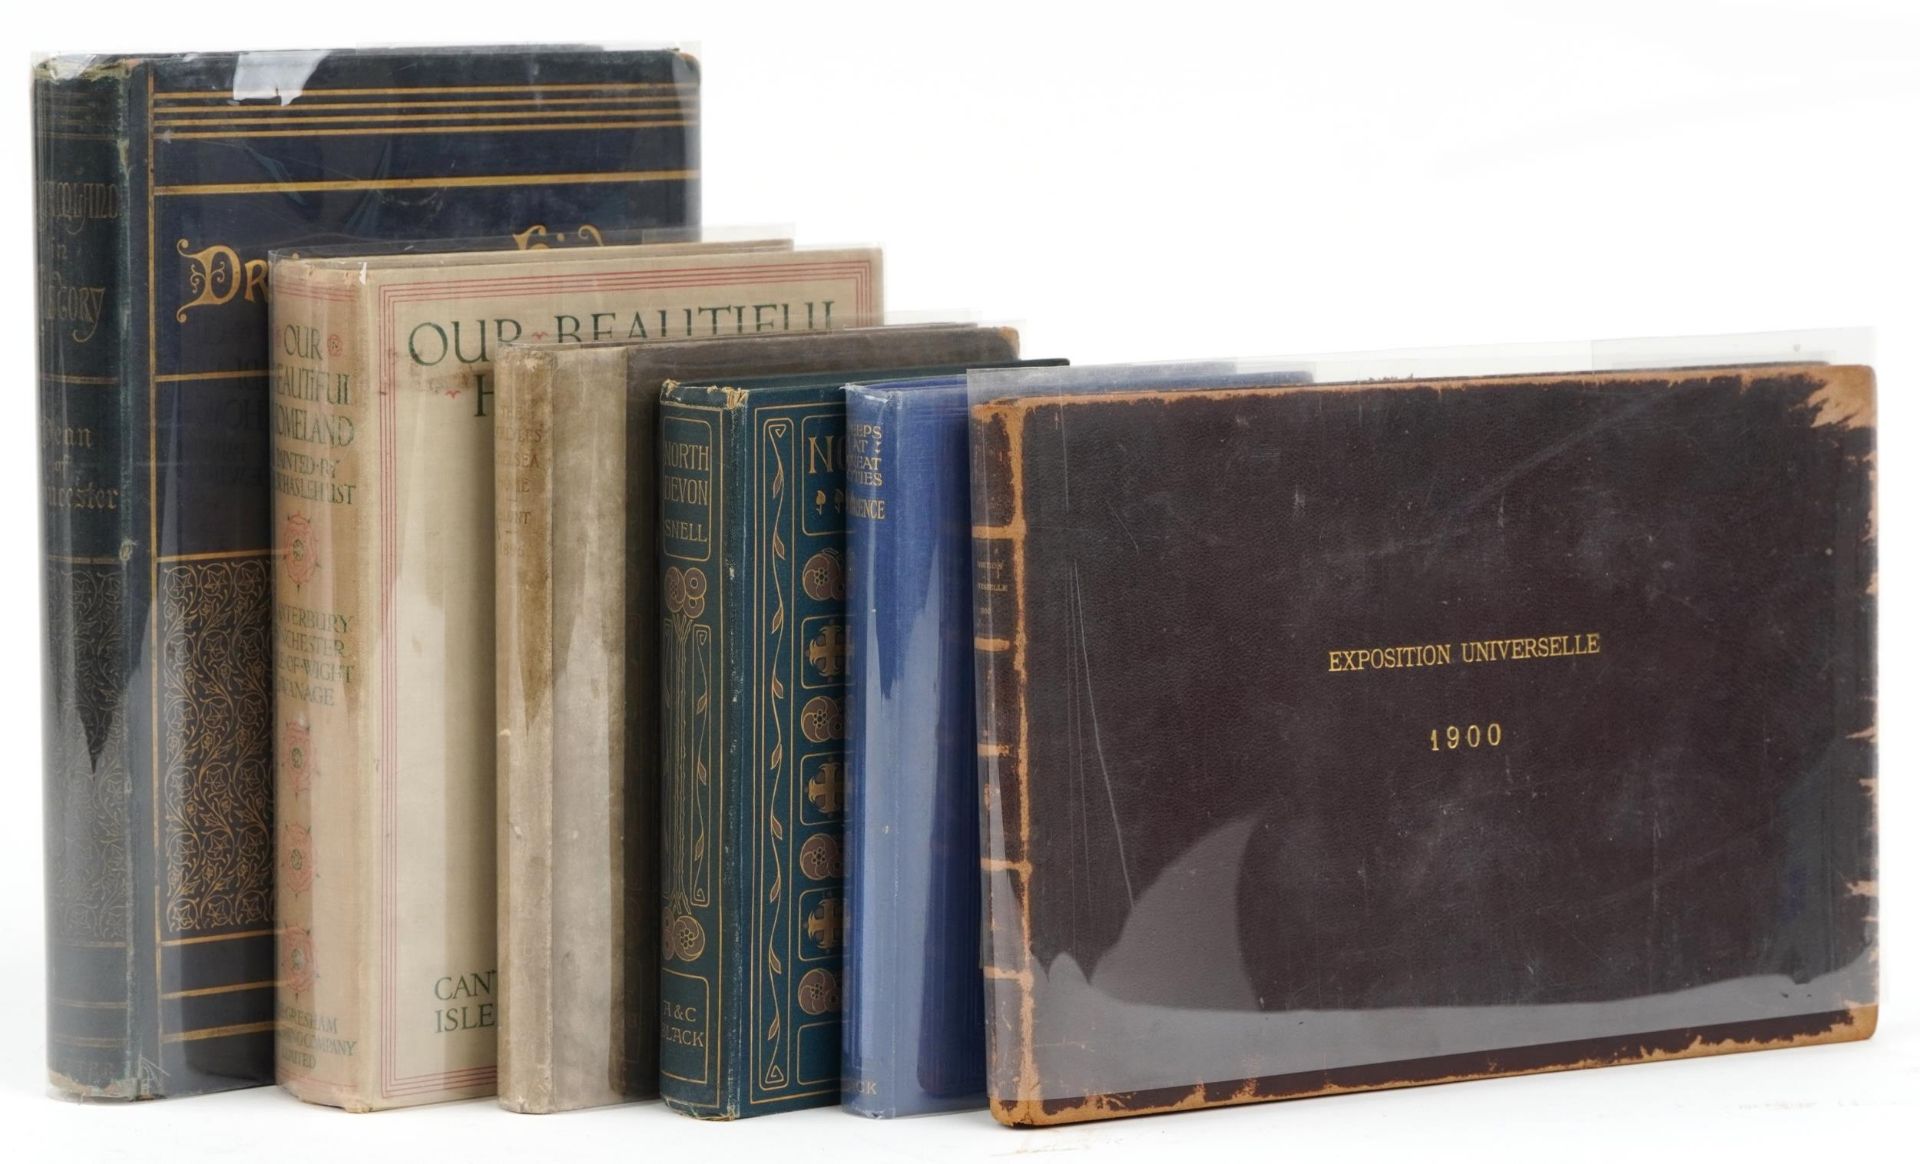 Six hardback books comprising Our Beautiful Homeland, Exposition Universelle 1900, The Charles